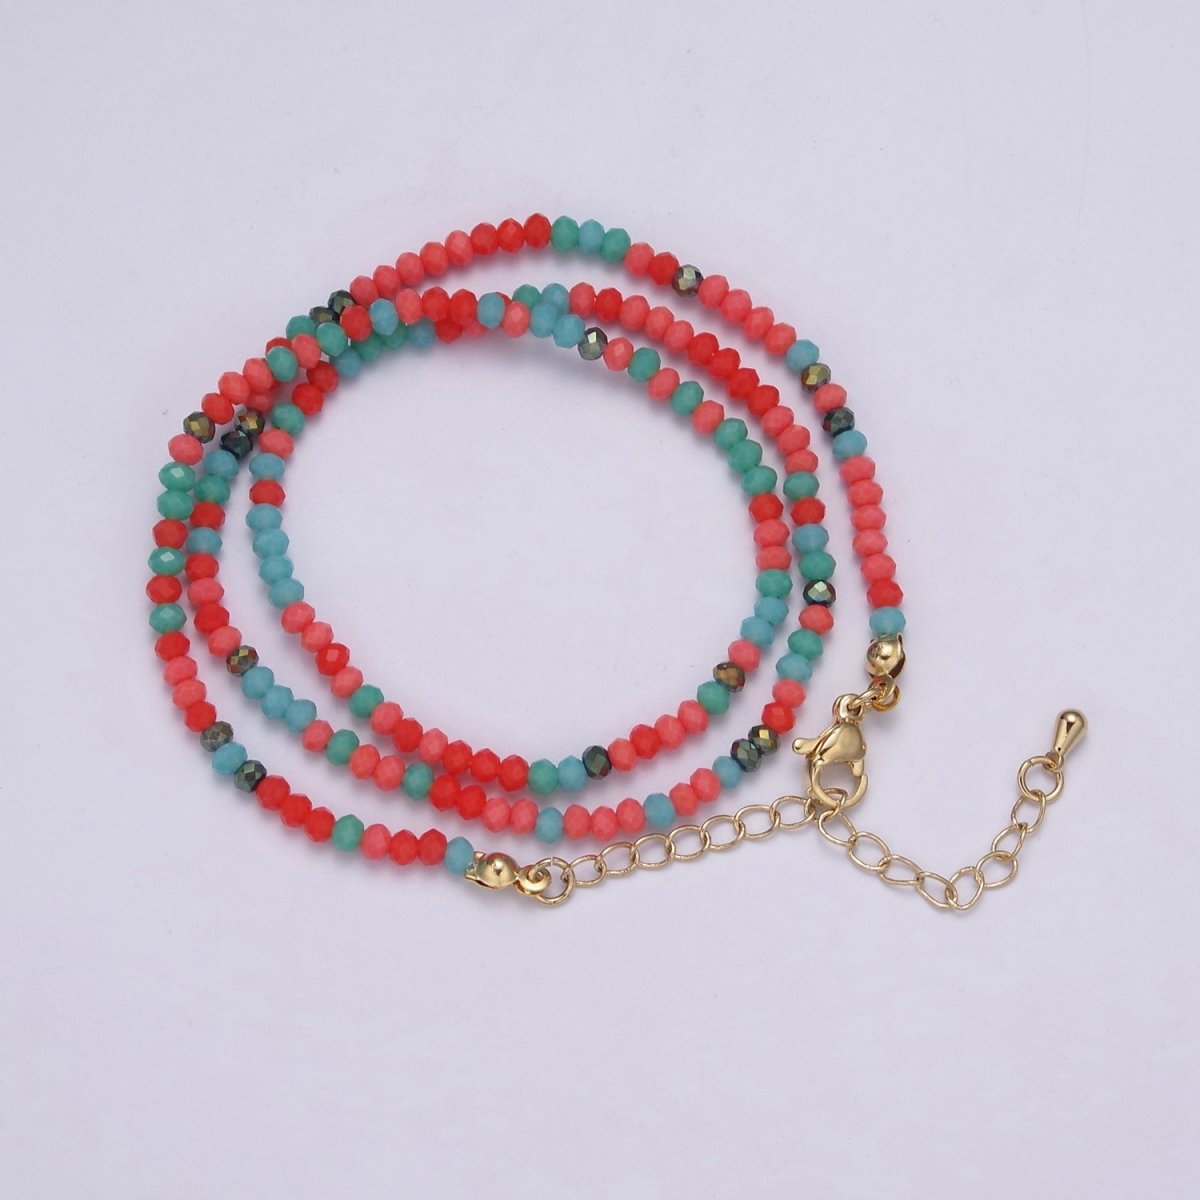 Turquoise Red Gold Beaded Necklace, Blue Seed Bead Necklace, Minimalist Choker, tiny beads, Blue Red Gold, Small Beads Choker, Beaded Necklace | WA-454 Clearance Pricing - DLUXCA